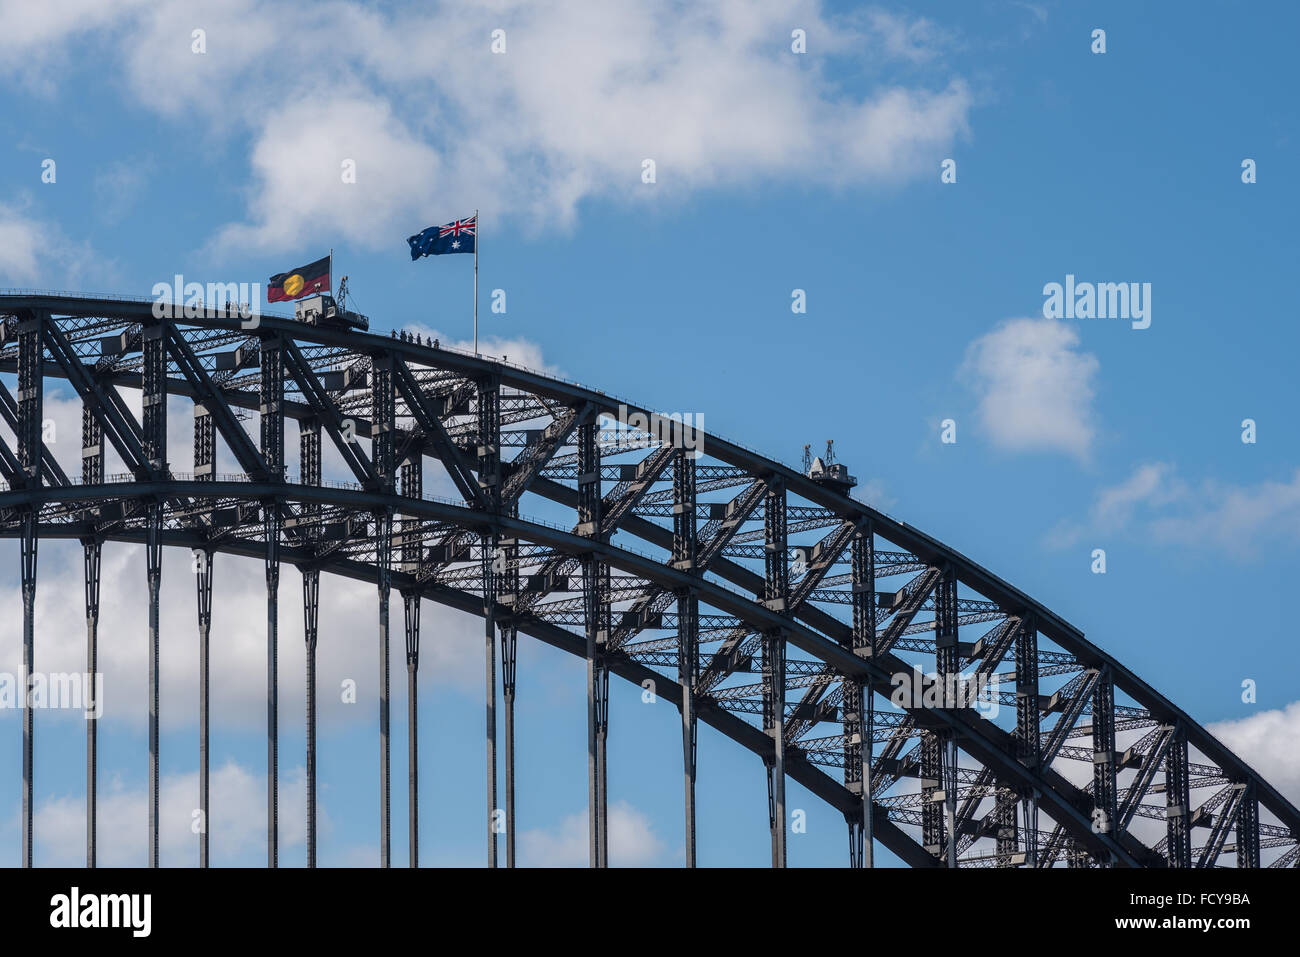 Sydney Harbor Bridge with Aboriginal flag. Taking the usual spot for the flag of the state of New South Wales, the Aboriginal flag flies on the day commemorated as on which white settlement started in 1788. For Aboriginal peoples and protesters, the 26 January is sometimes called 'Invasion Day'. Credit:  Duncan Sharrocks/Alamy Live News Stock Photo